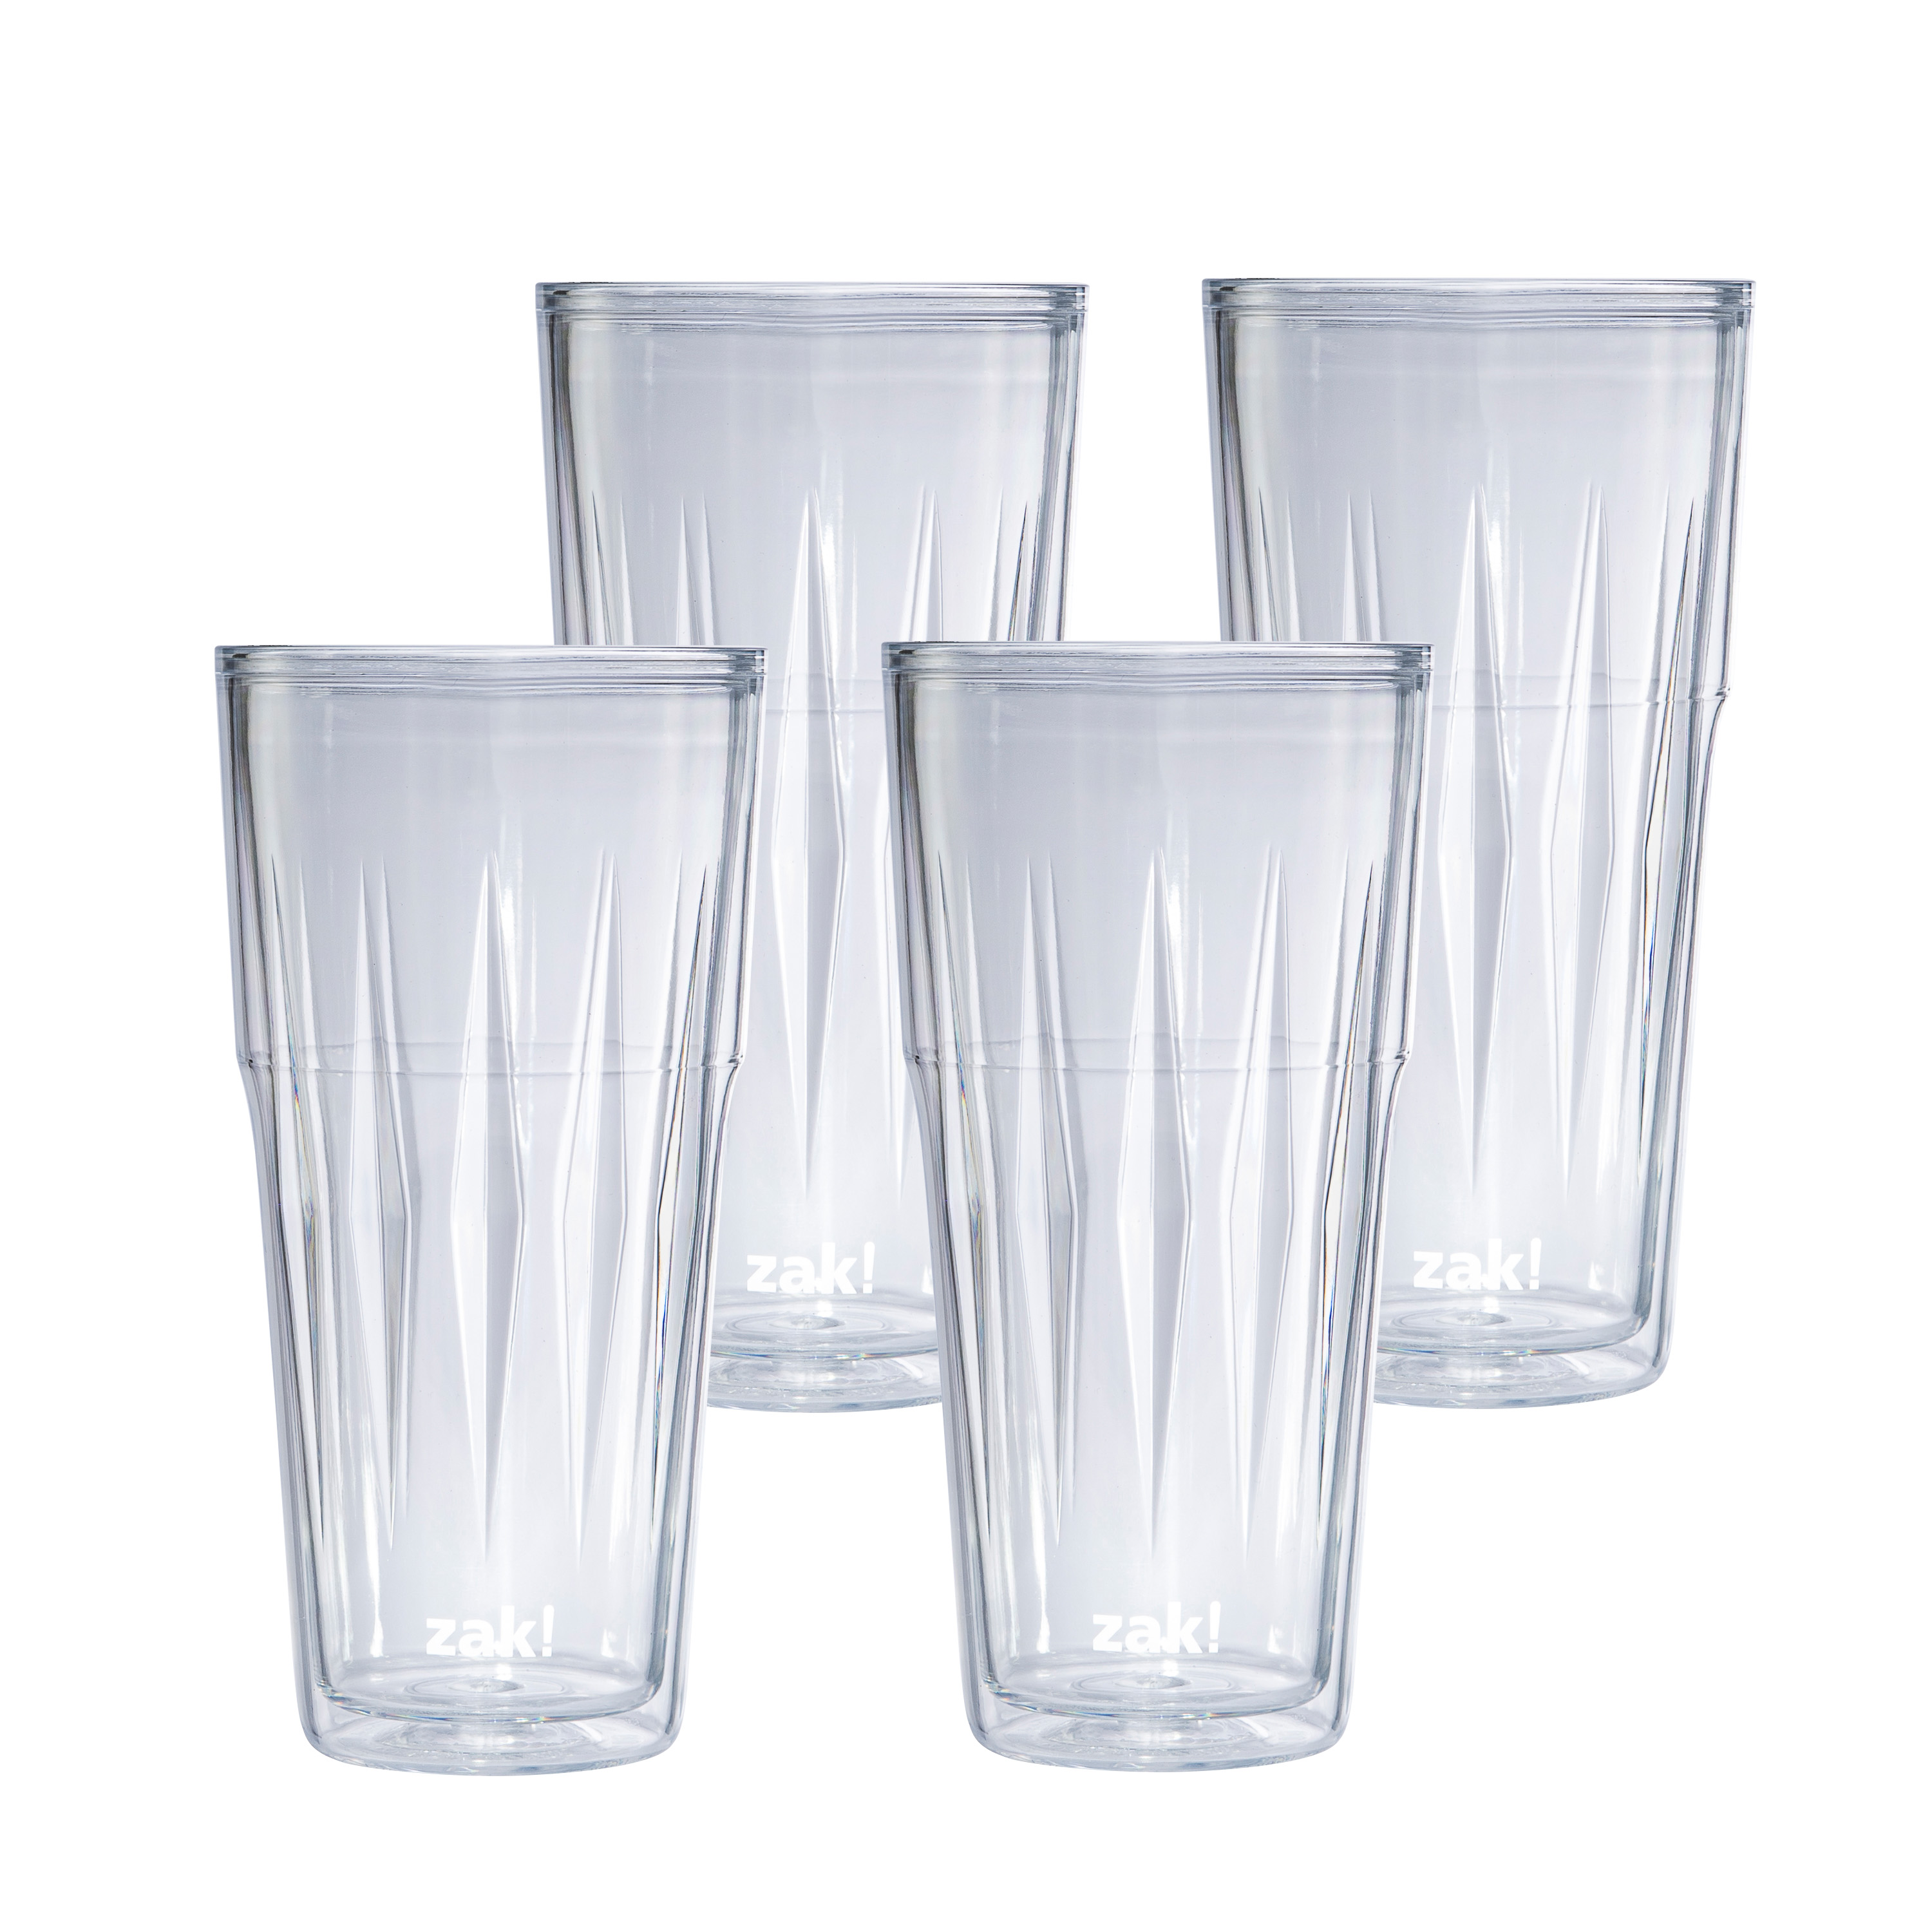 Gem 16 ounce Reusable Plastic Tumbler with Lid and Straw, Translucent, 4-piece set image